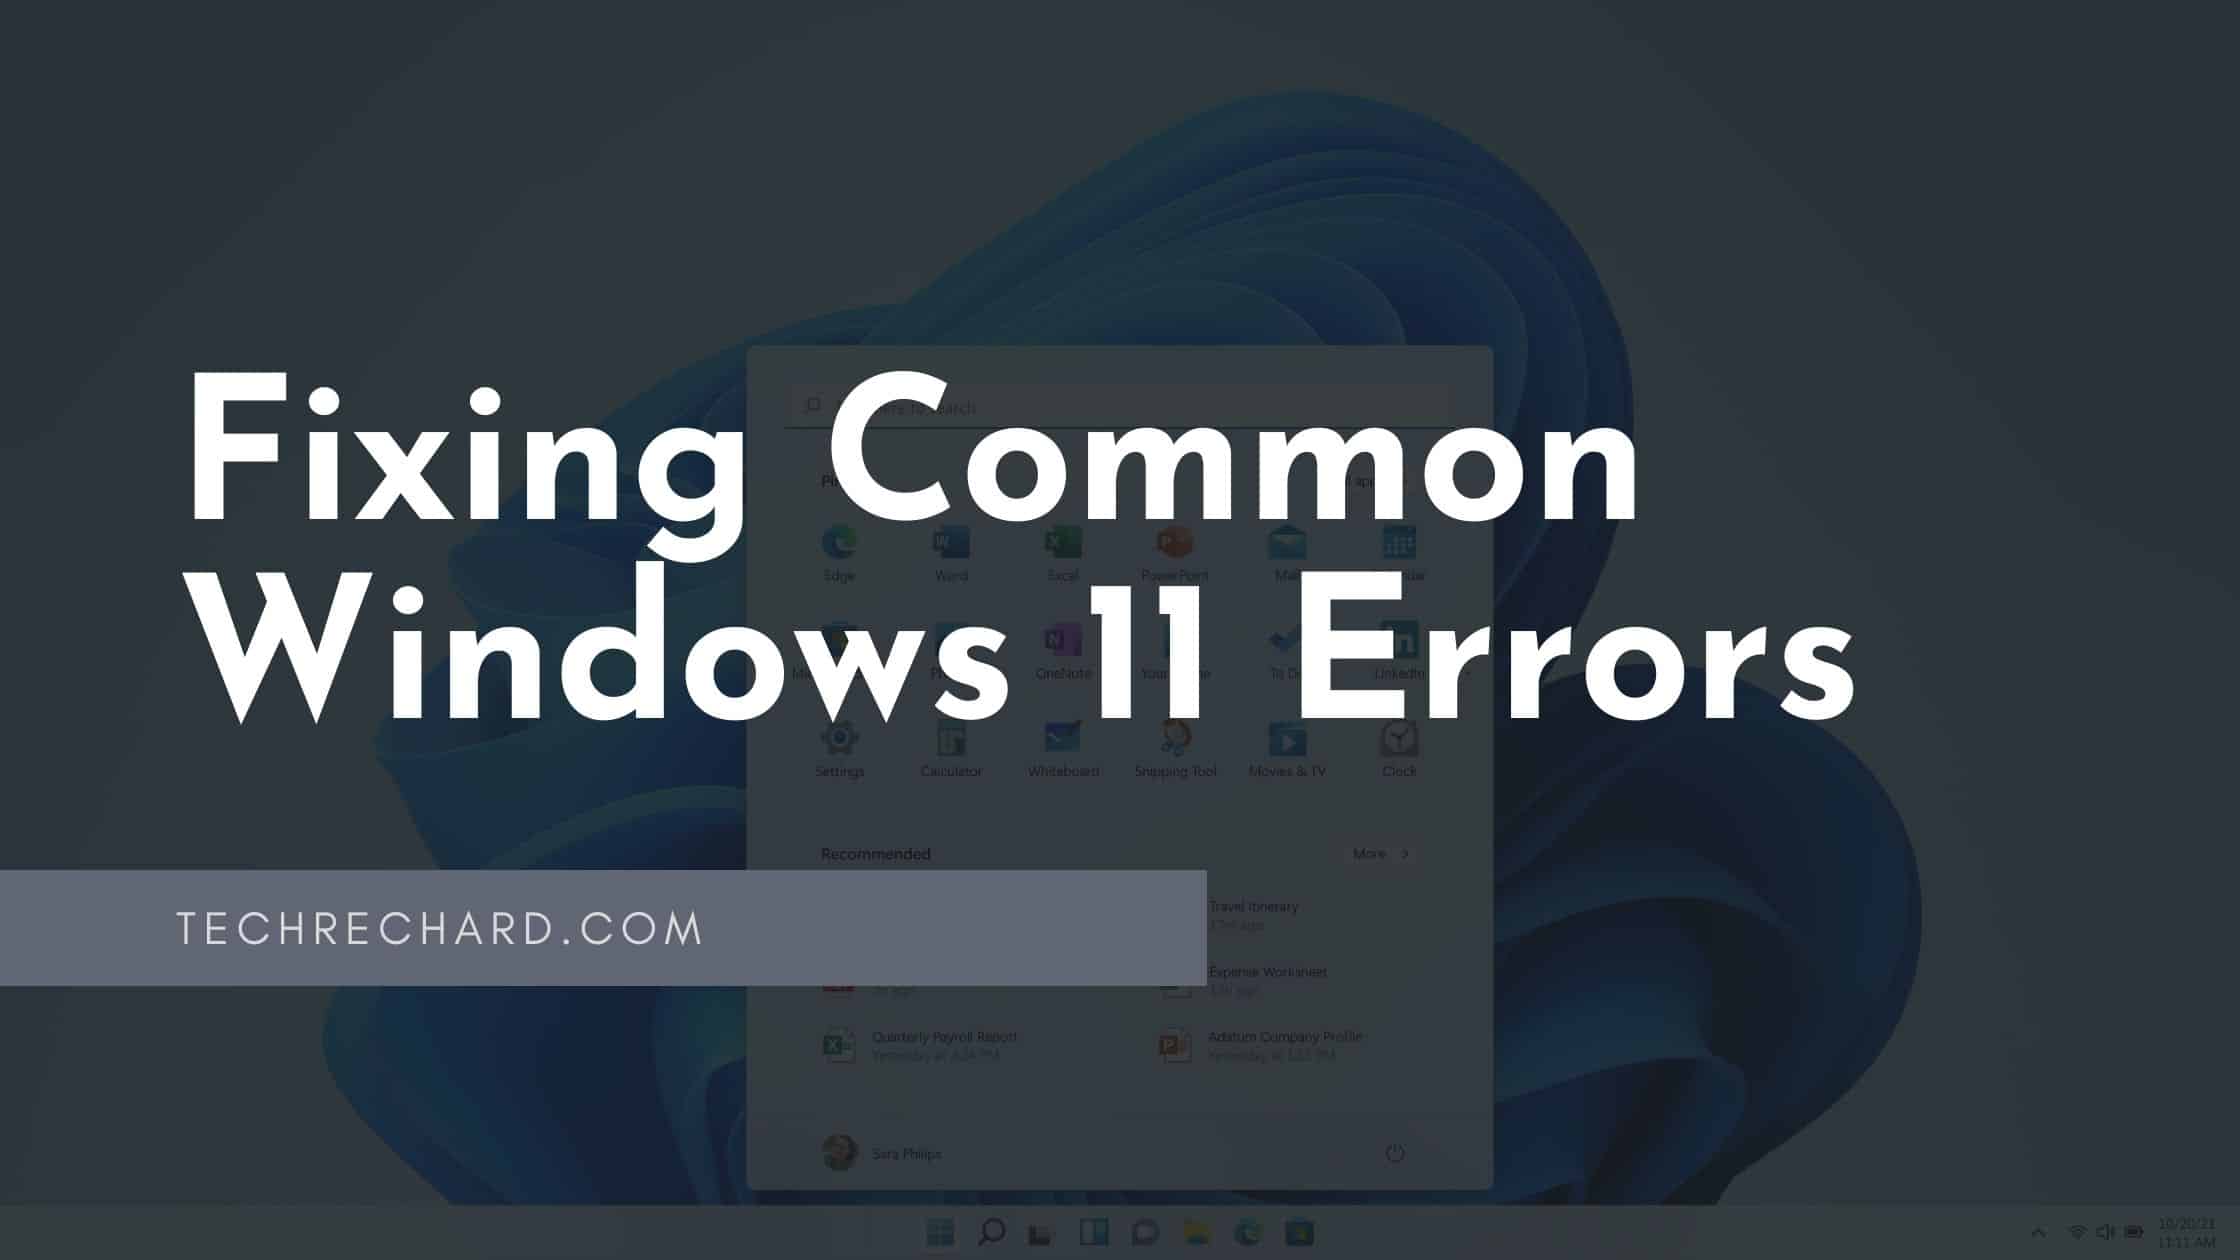 9 Known Issues With Windows 11 and How to Fix Them